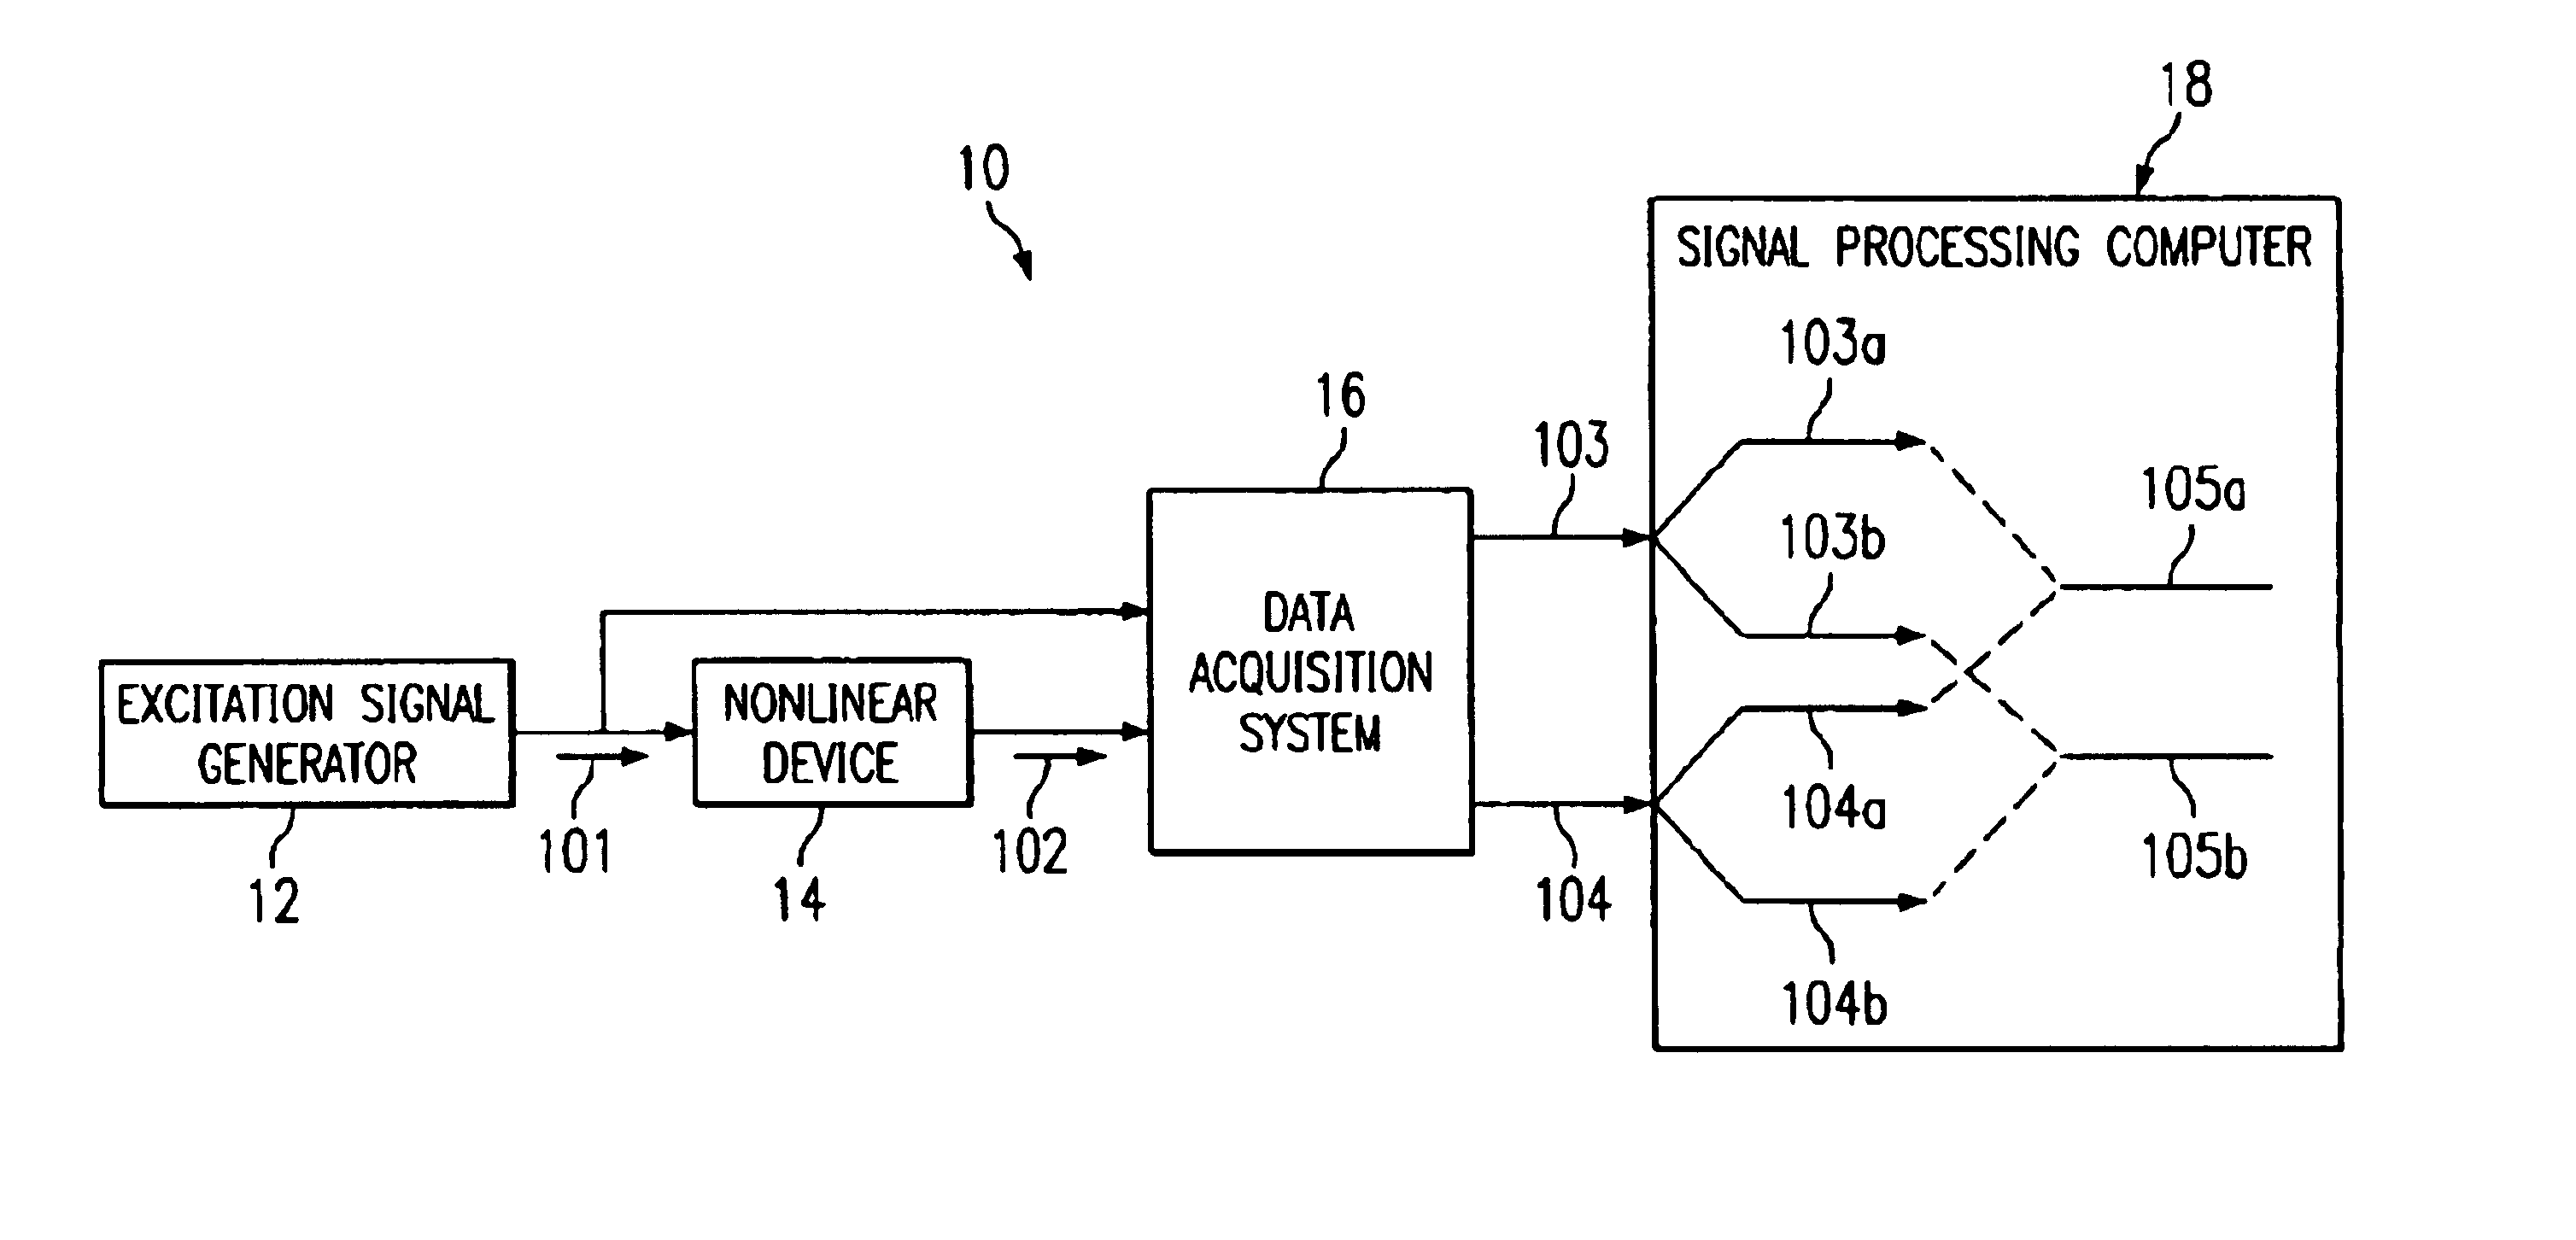 Method for the rapid estimation of figures of merit for multiple devices based on nonlinear modeling